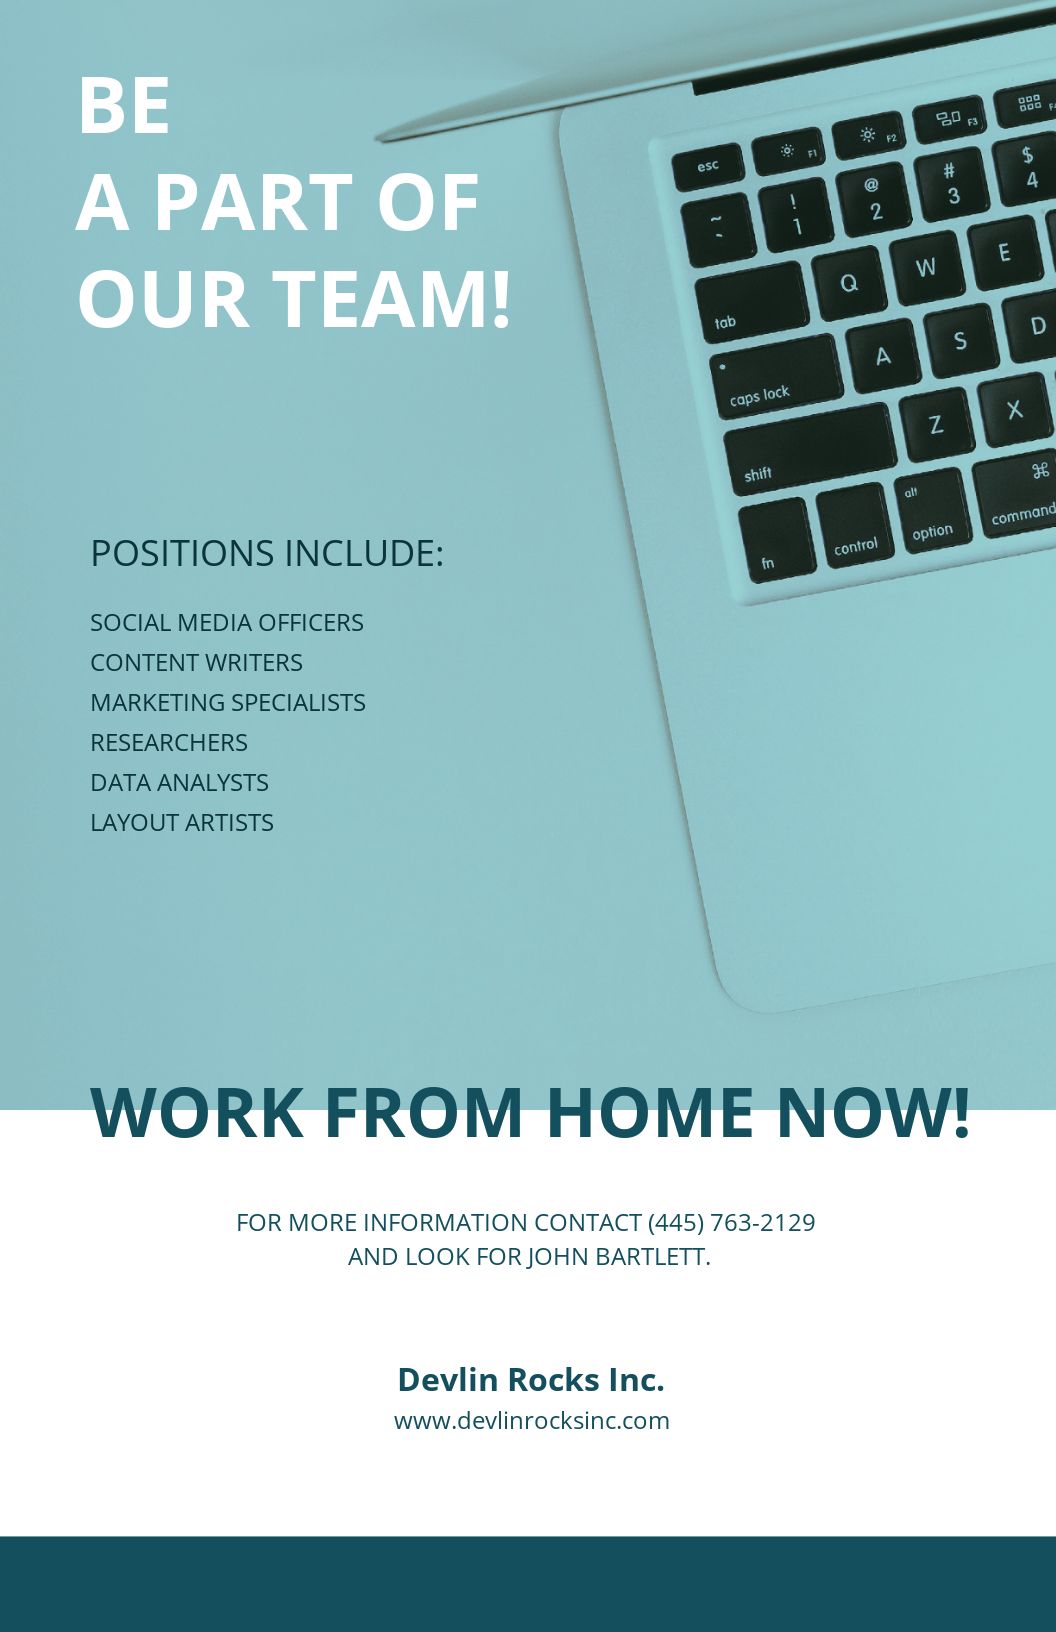 work-from-home-now-poster-template